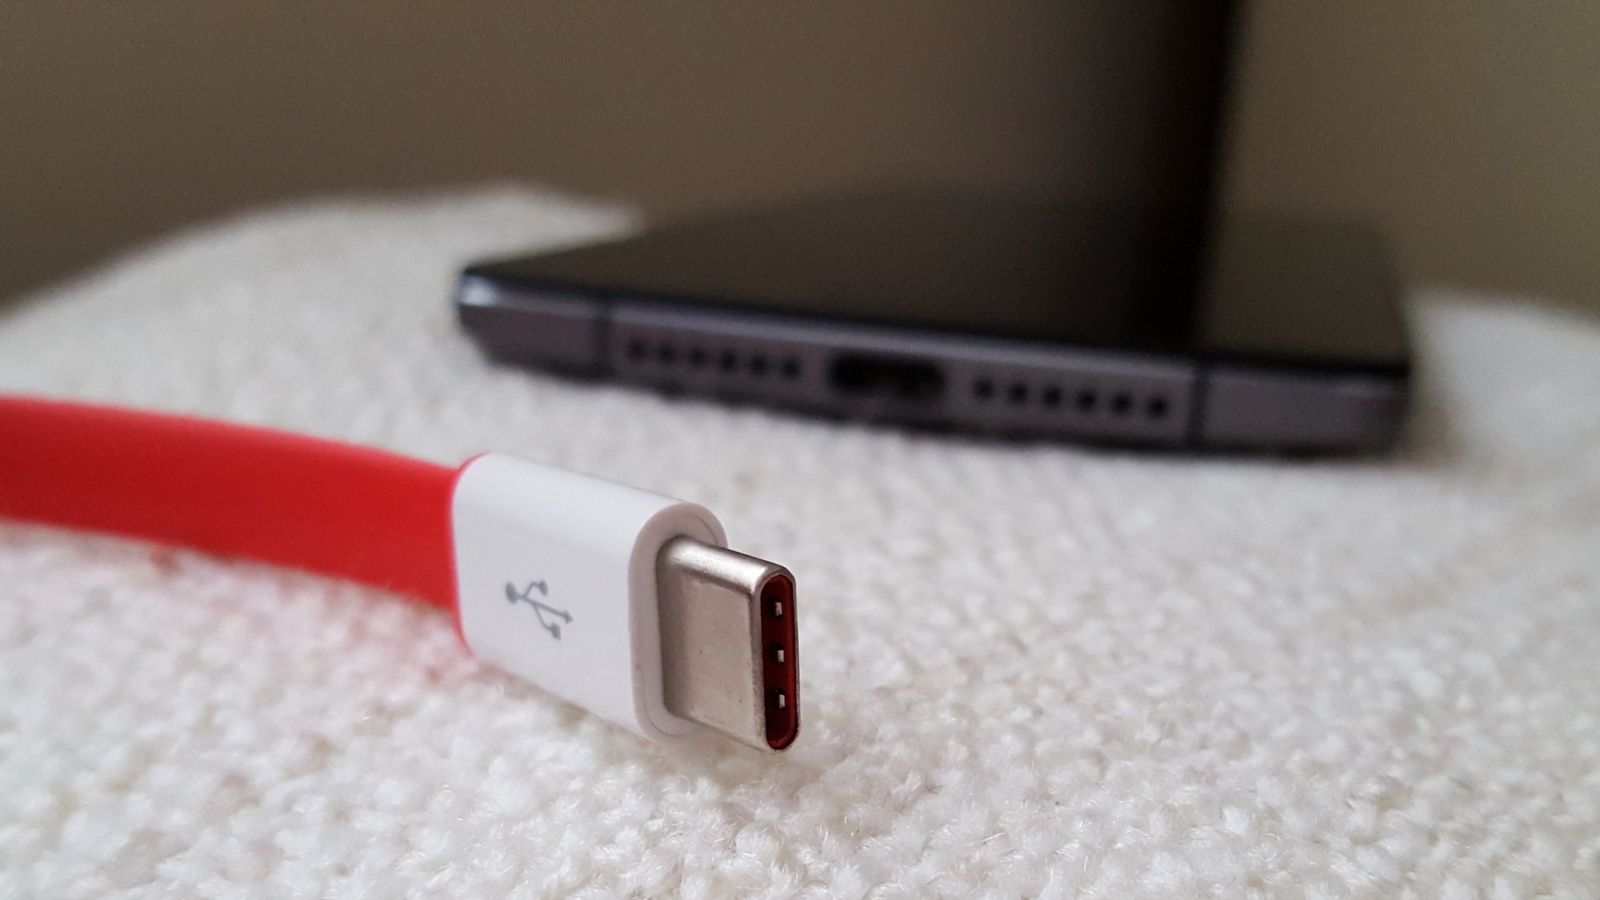 amazon-cracks-down-on-bad-usb-c-cables-that-can-kill-your-gadgets-image-cultofandroidcomwp-contentuploads201511OnePlus-2-USB-C-jpg